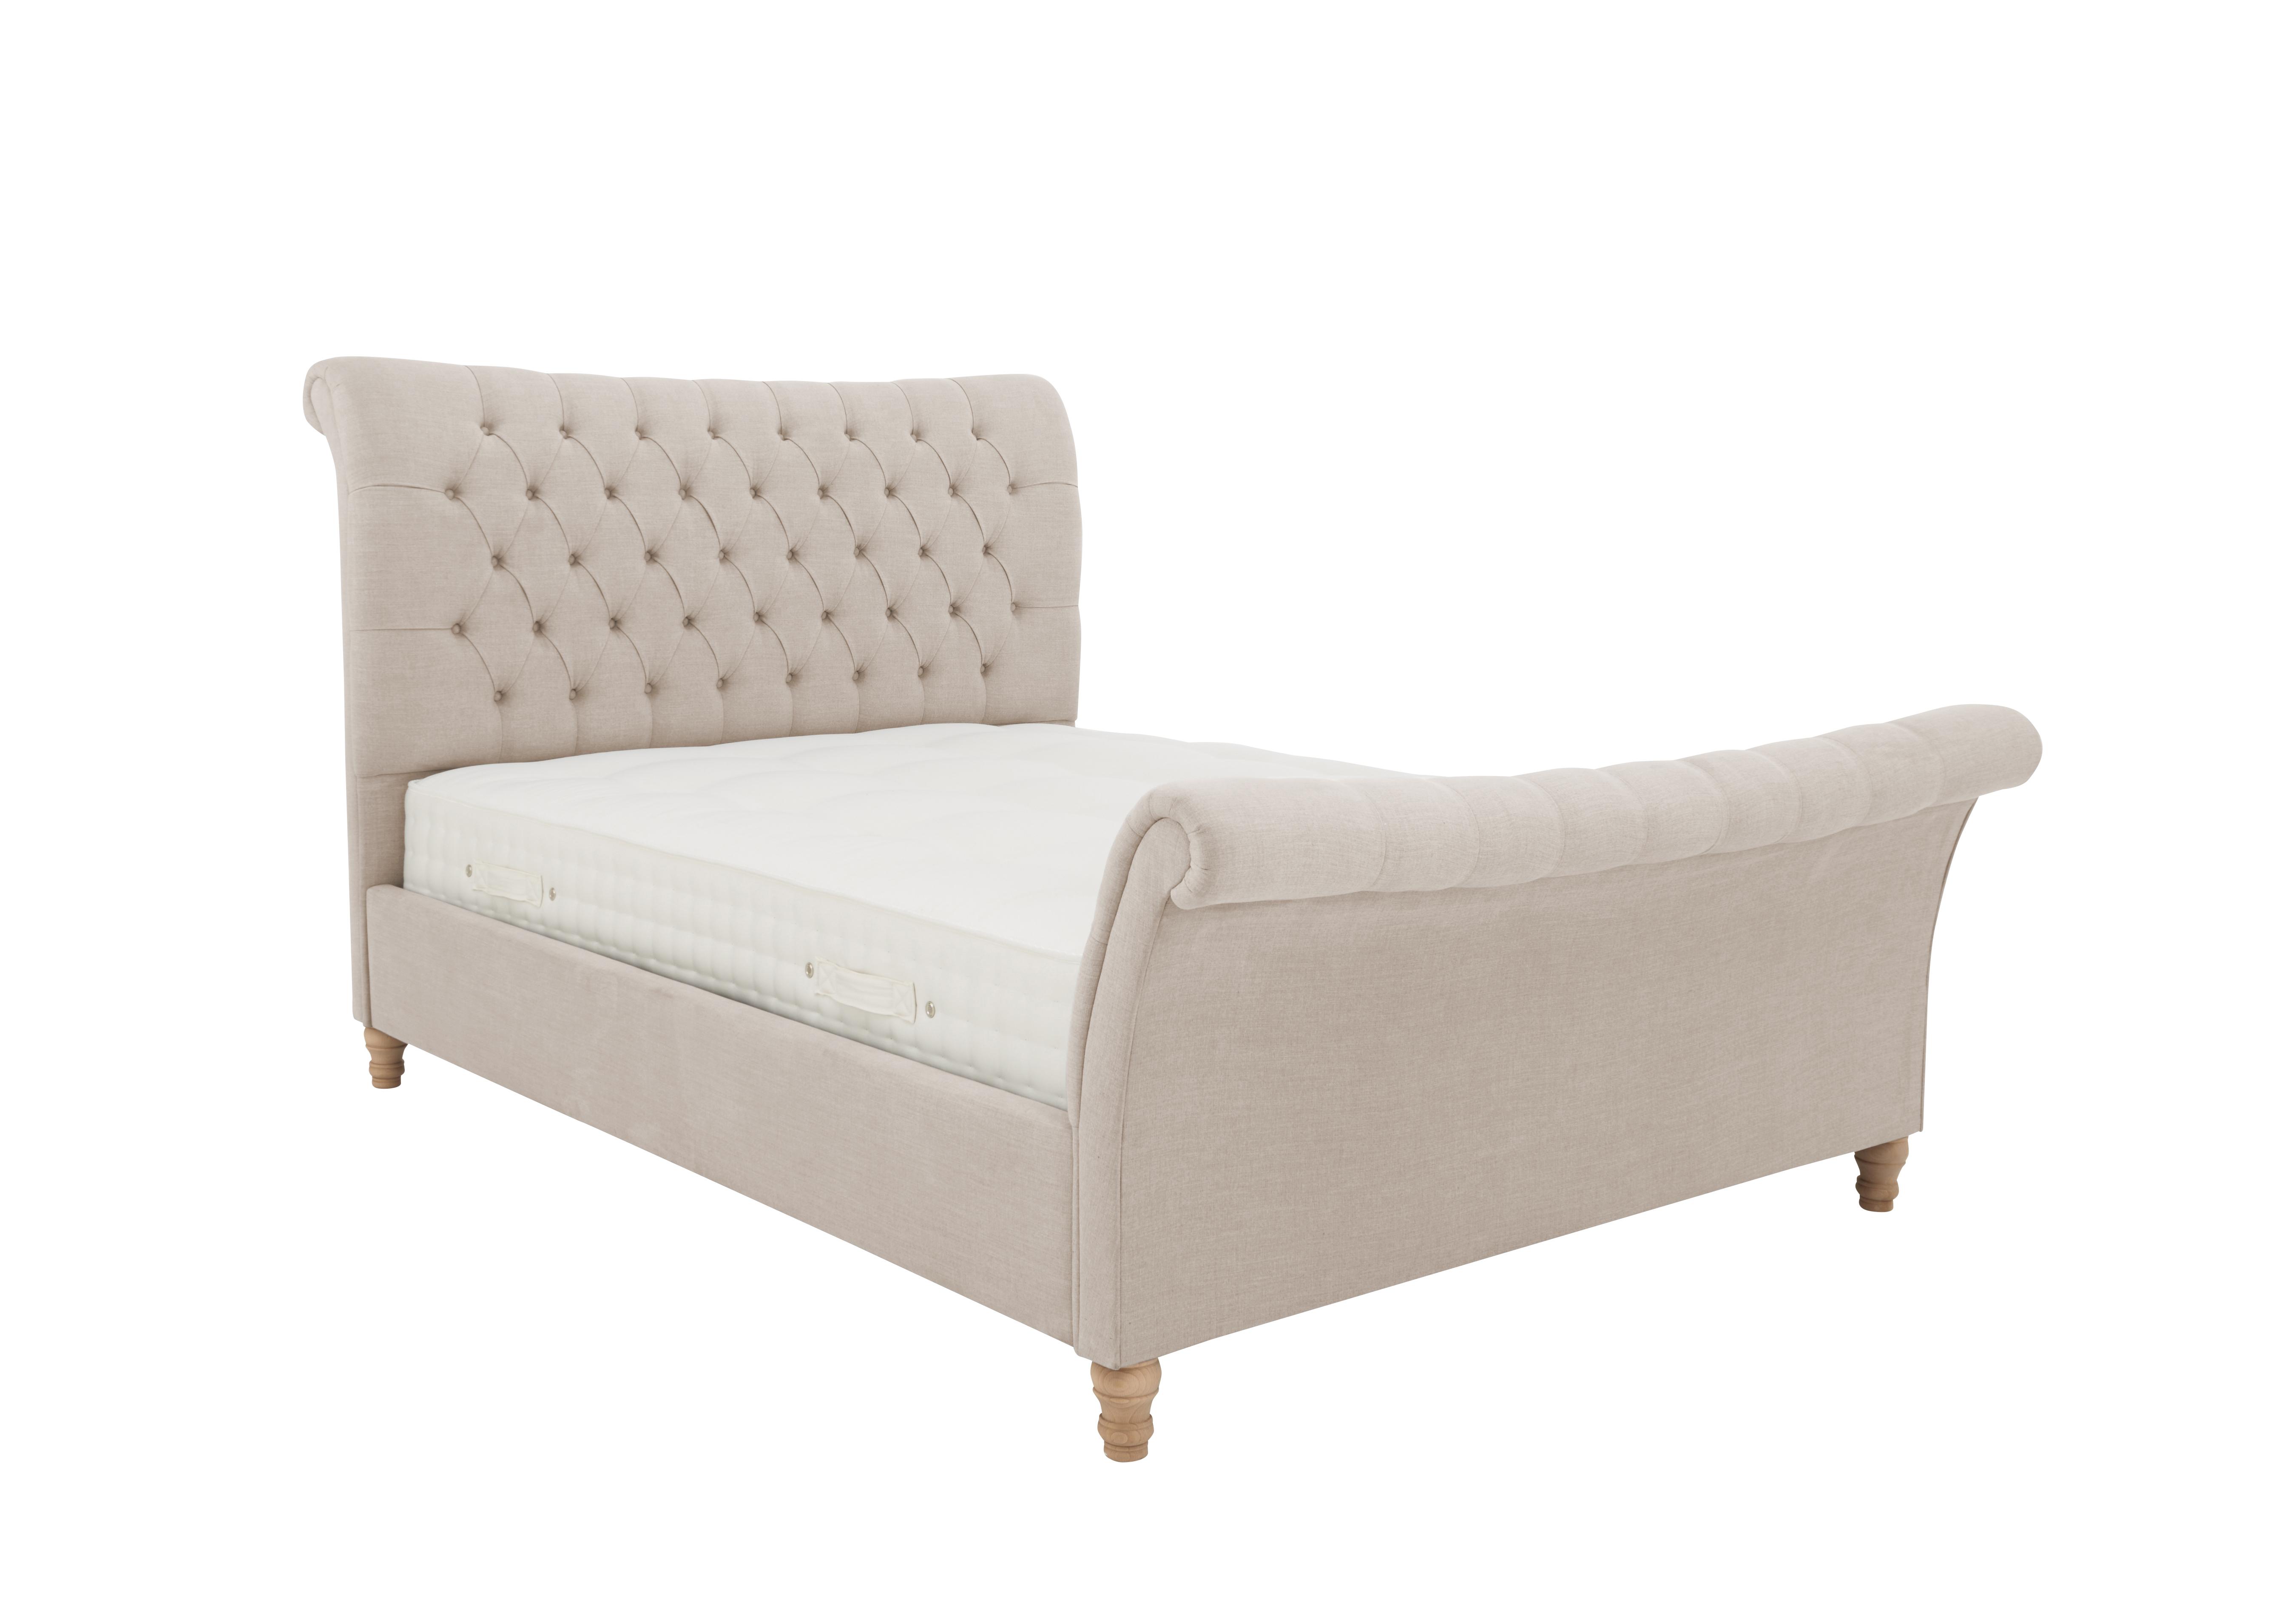 Evie Bed Frame in Linnet Clay on Furniture Village